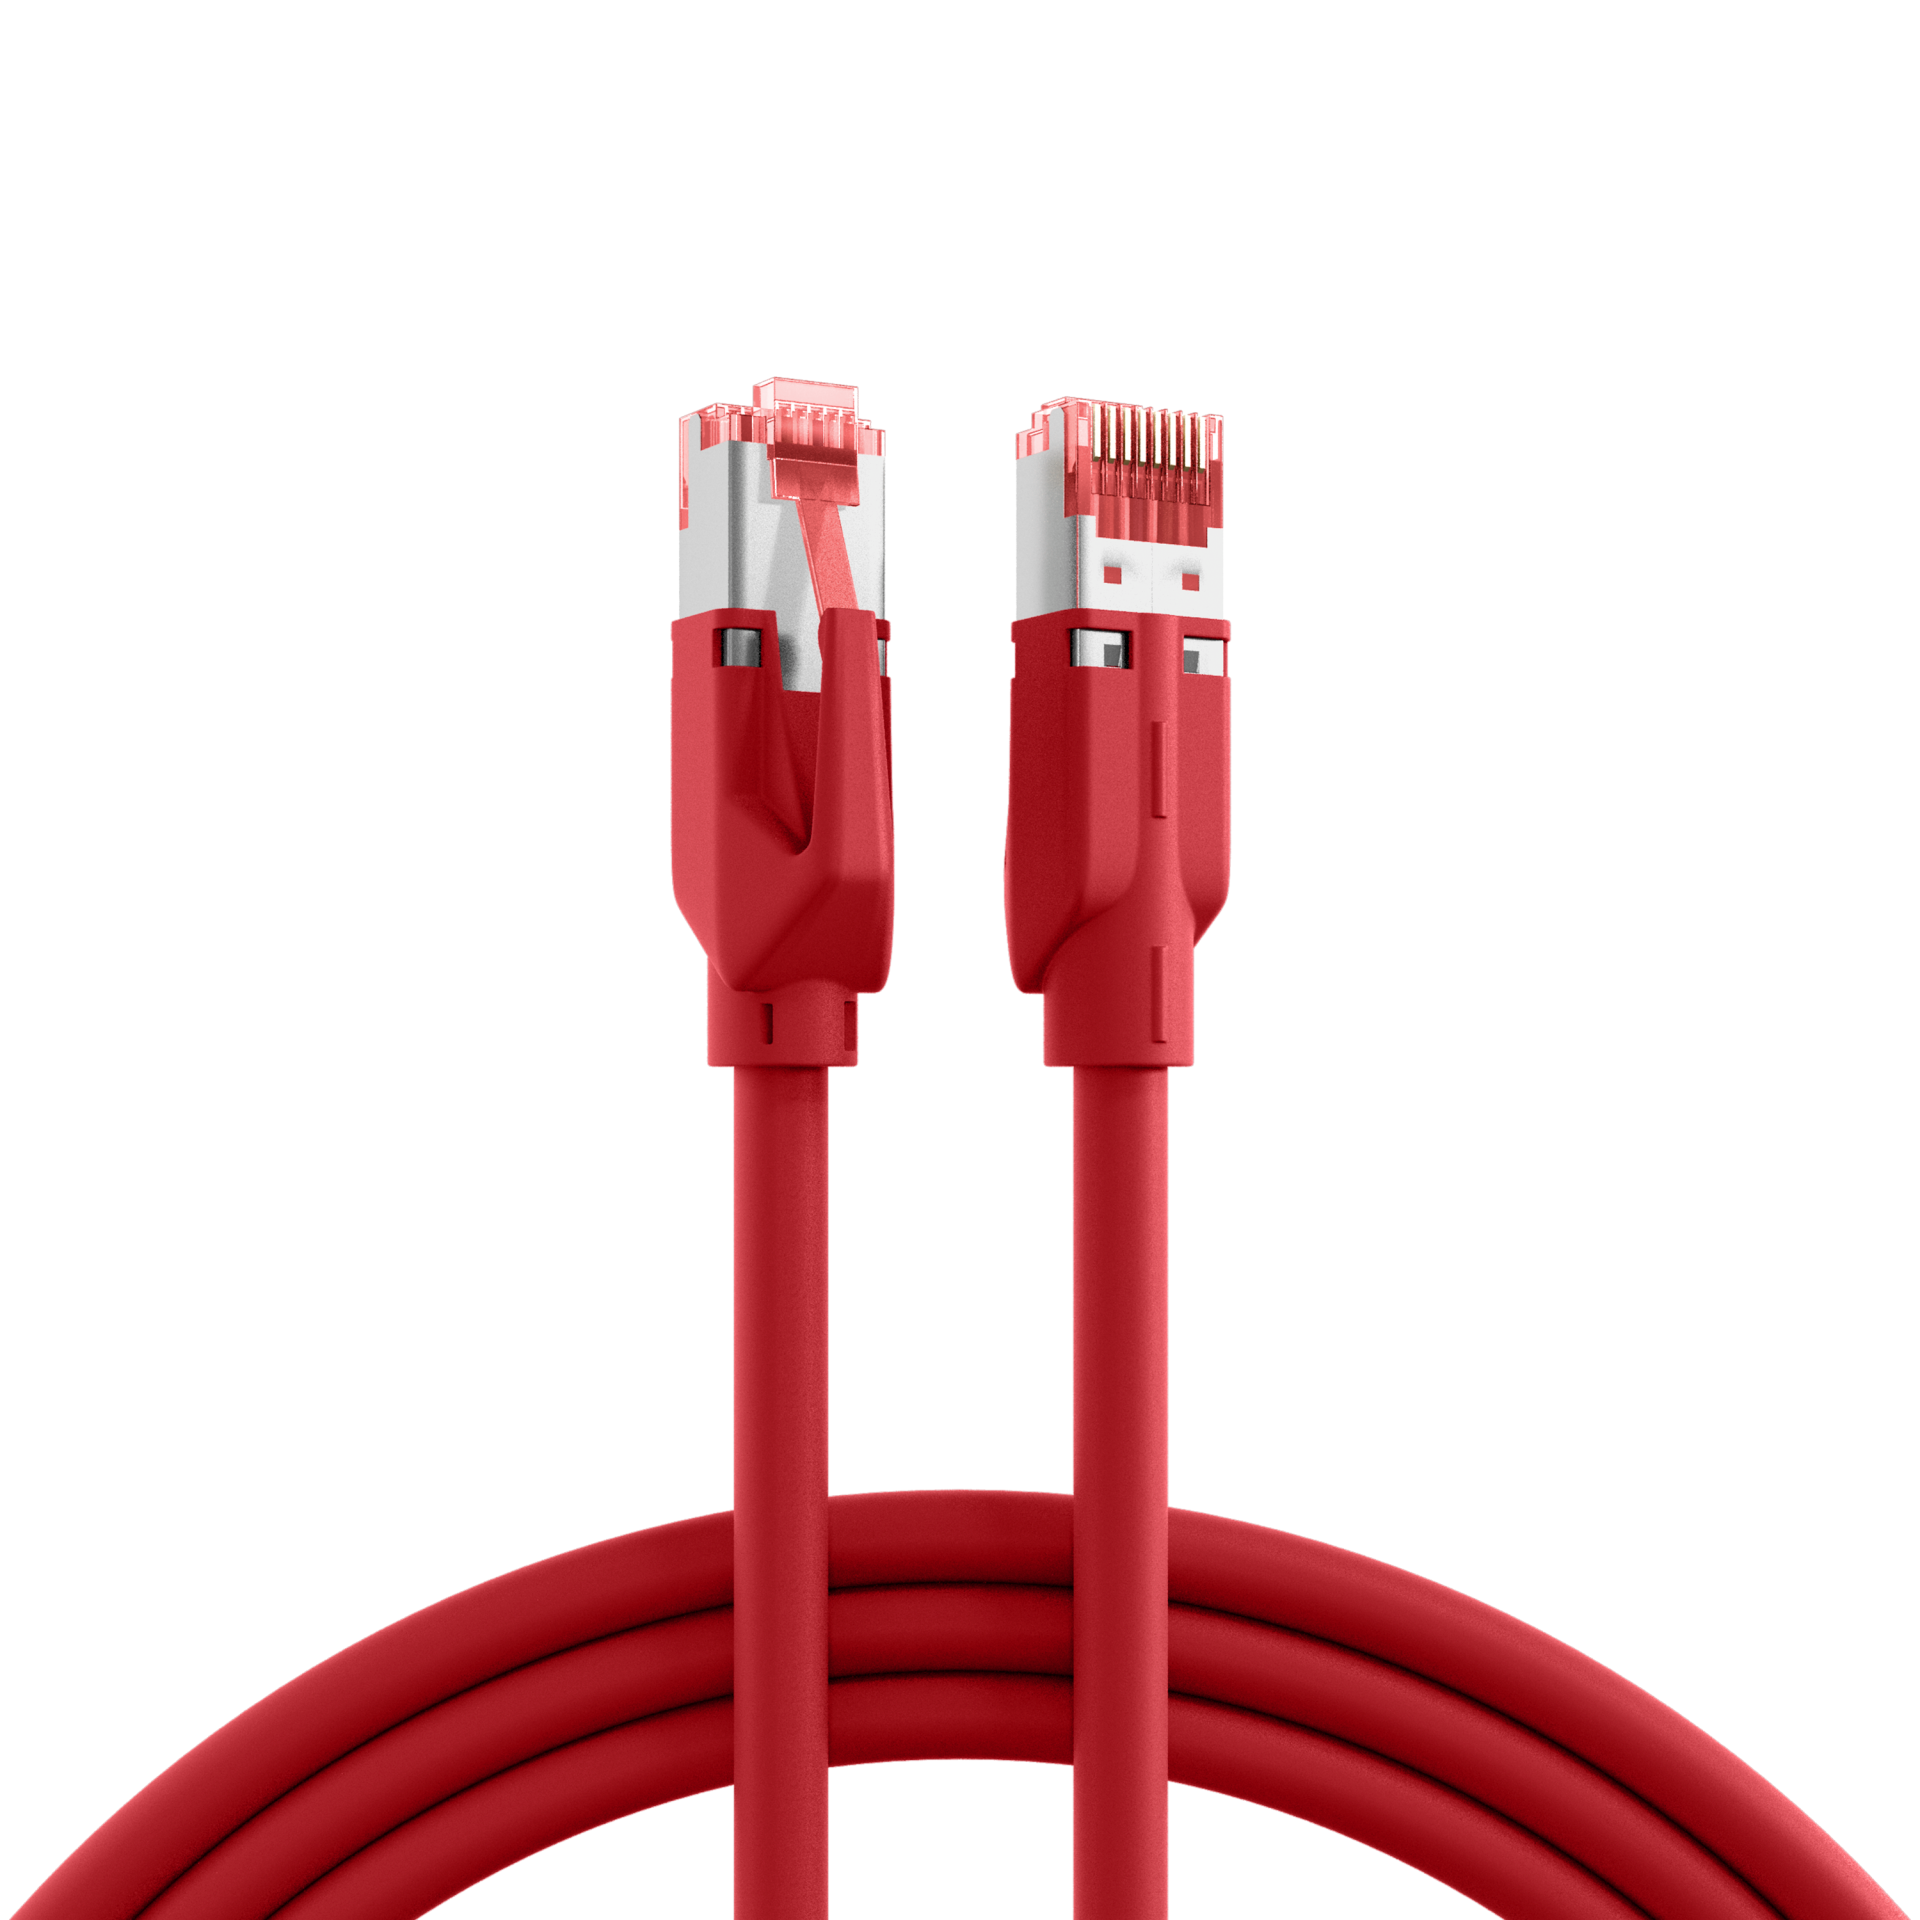 RJ45 Patch Cord Cat.6A S/FTP Dätwyler 7702 TM21 red 5m